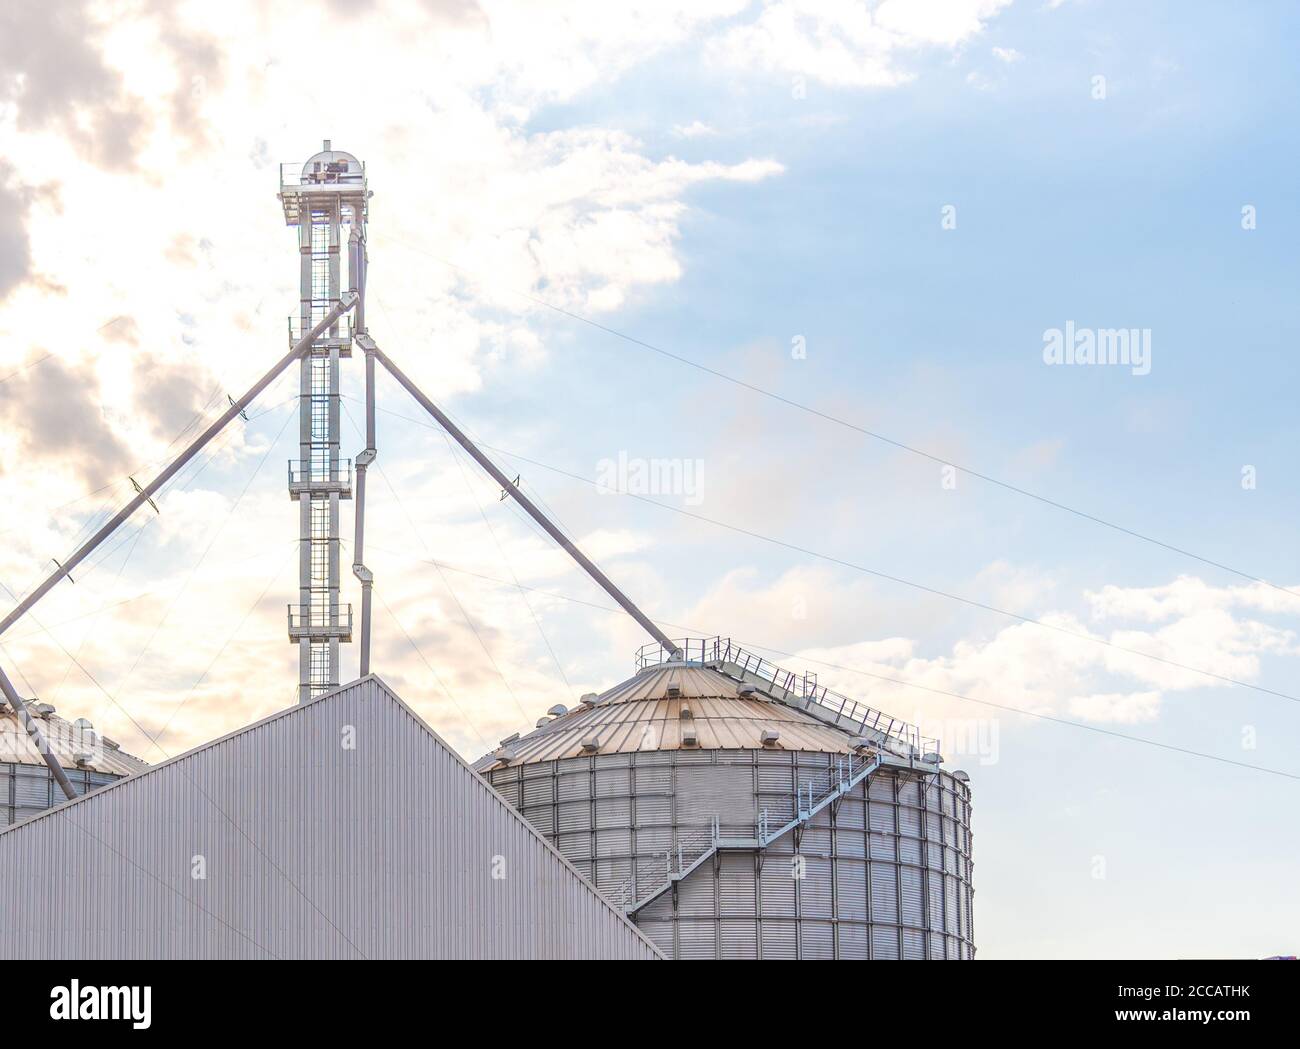 Metallic warehouse. Grain storage silo. Soy deposit. Infrastructure for storage and storage of agricultural products. Agriculture in Brazil. Grain war Stock Photo